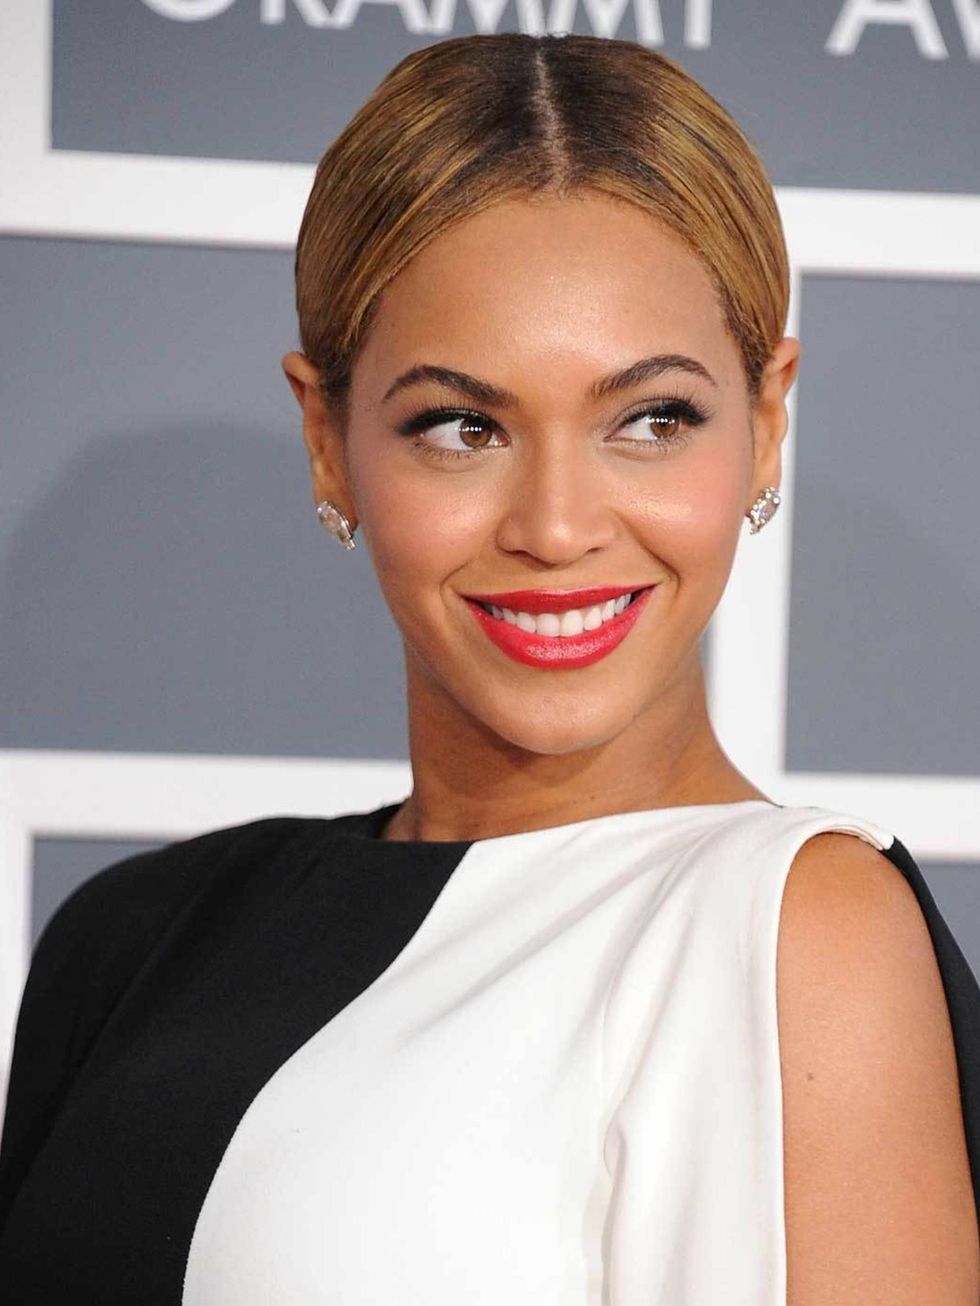 <p><a href="http://www.elleuk.com/star-style/news/beyonce-destinys-child-super-bowl-2013">Beyonce's</a> block monochrome outfit was perfectly befitting the velvet red lips + super sleek hair choice. A refreshing change from the tumbling curls and smoky ey